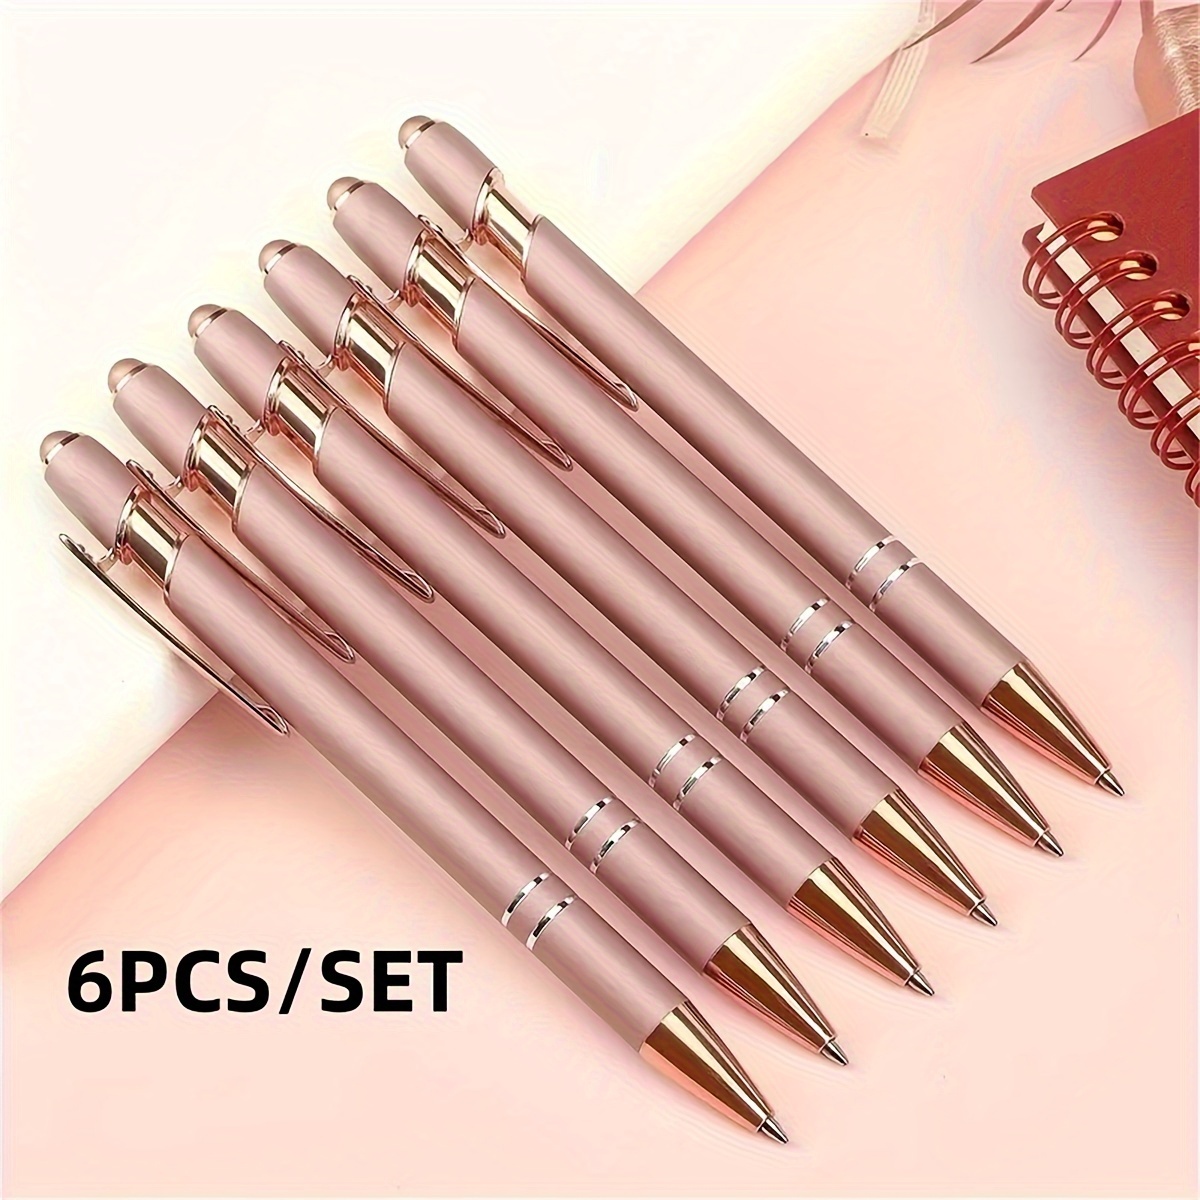 

3pcs/6pcs Rose Gold Metal Ballpoint Pen With Rubber Soft Stylus, Glitter 1mm Black Ink, Touch Screen Mobile Phone Display Tablet, Suitable For Giving Relatives And Friends Family Office Study Supplies